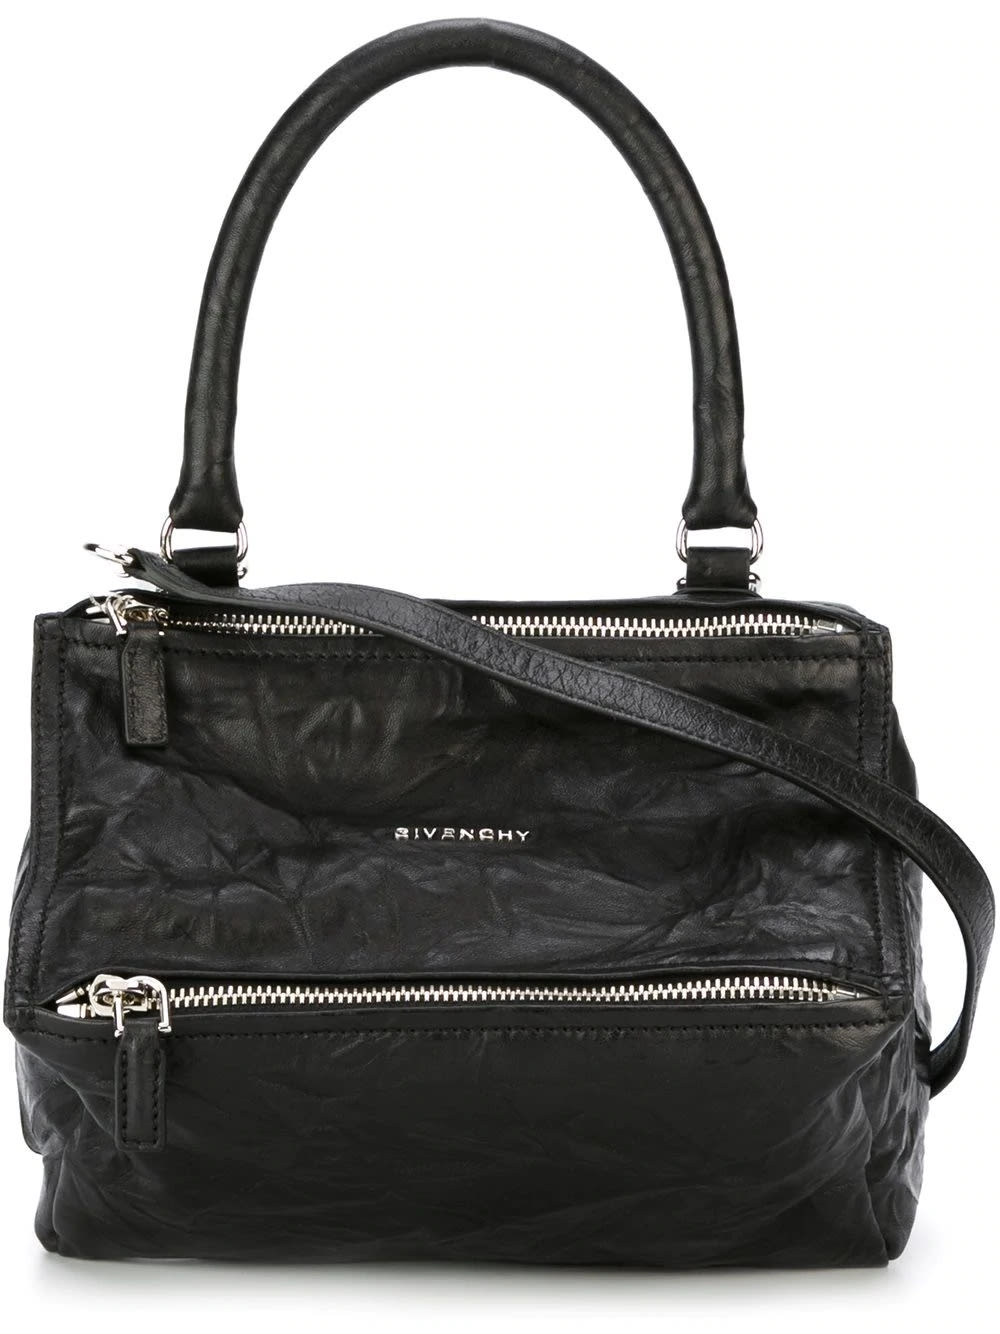 GIVENCHY SMALL PANDORA BAG IN AGED BLACK LEATHER,BB05251004 001